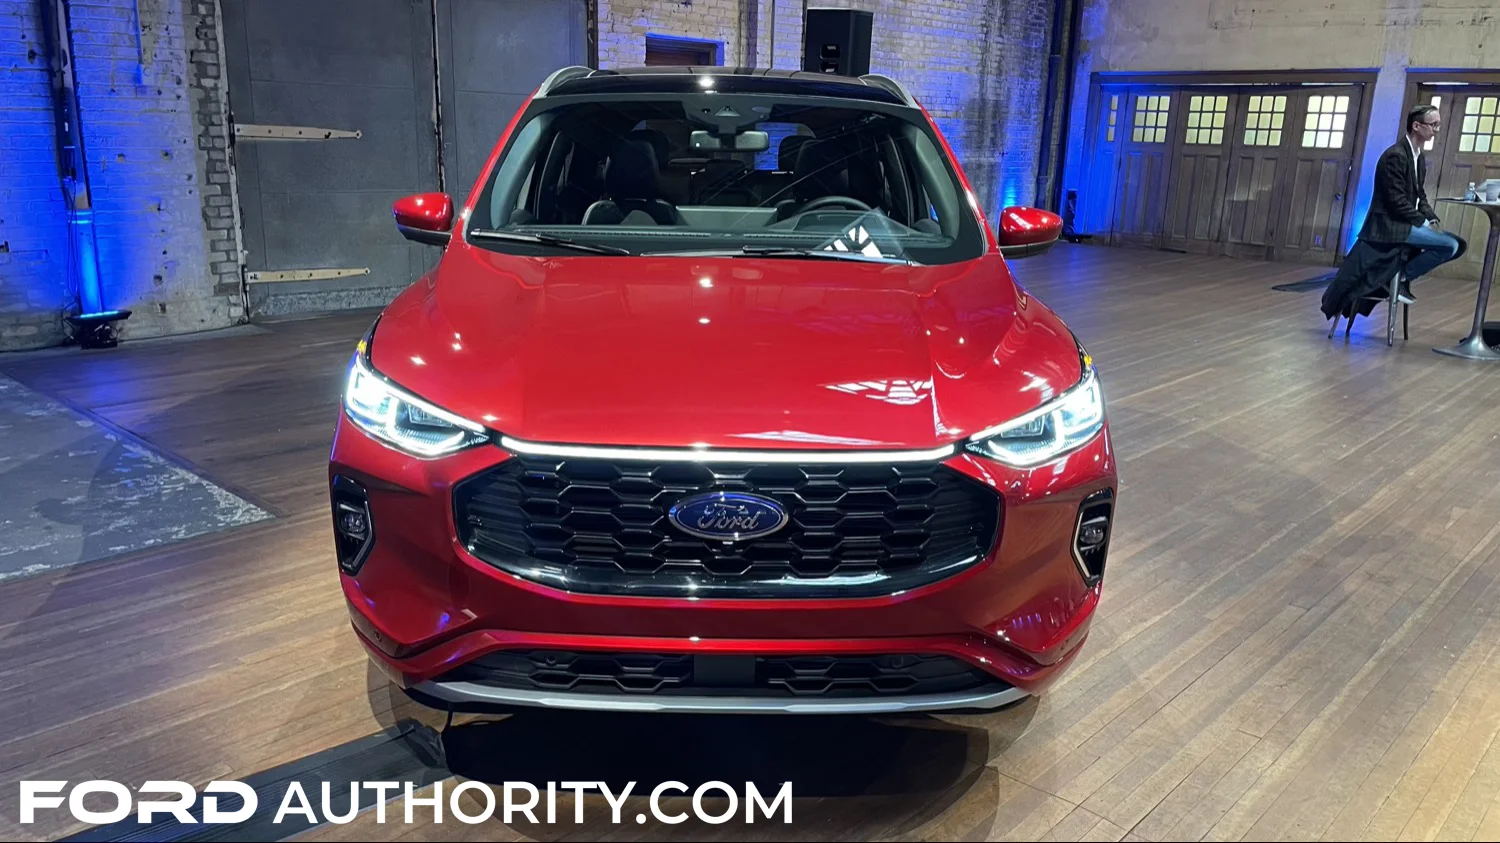 2023 Ford Escape Features Four Lights Within Headlight Cluster